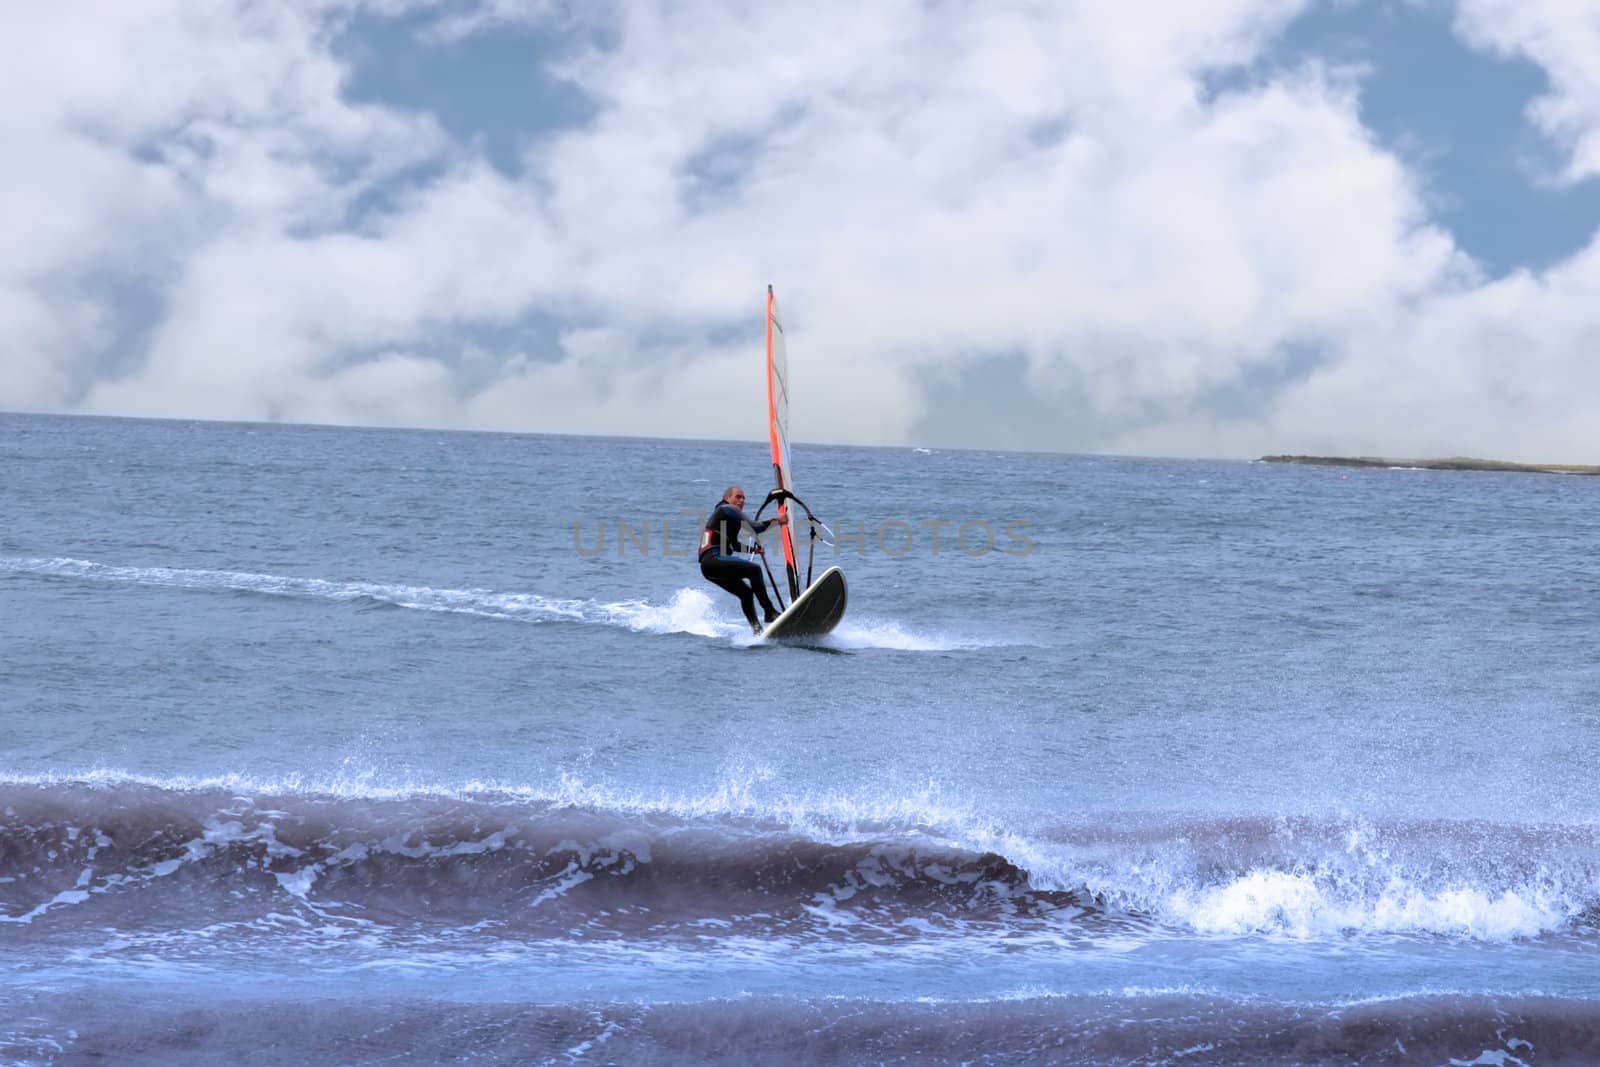 surfer windsurfing in a storm by morrbyte